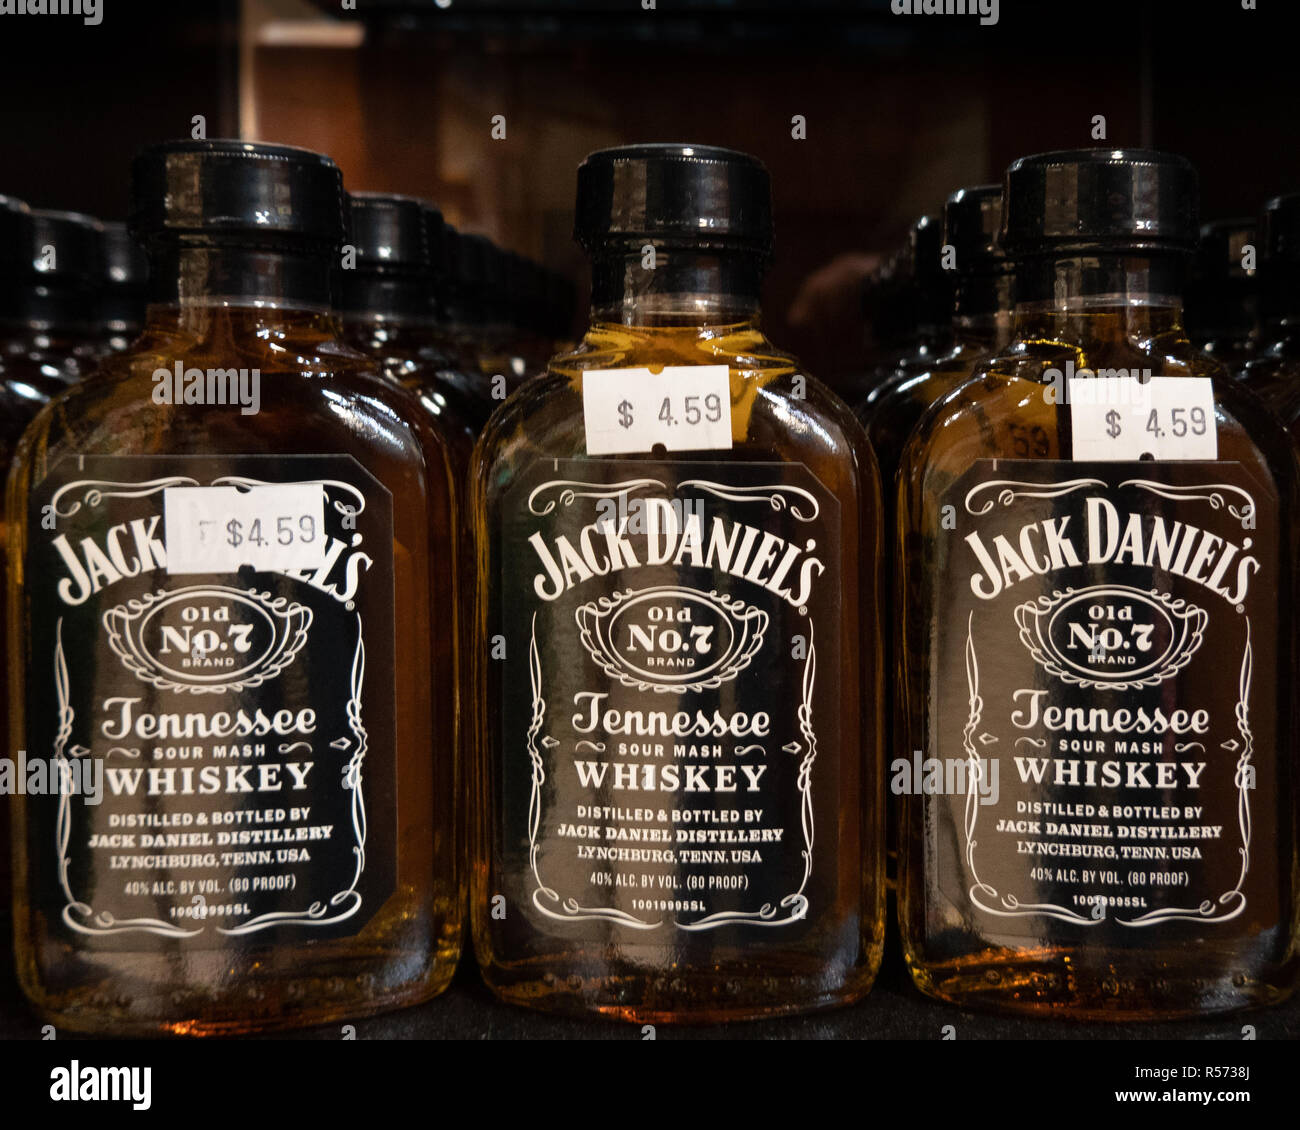 A shelf full of bottles of Jack Daniel's Old No. 7 Tennessee Sour Mash Whiskey for sale in a liquor store. Stock Photo